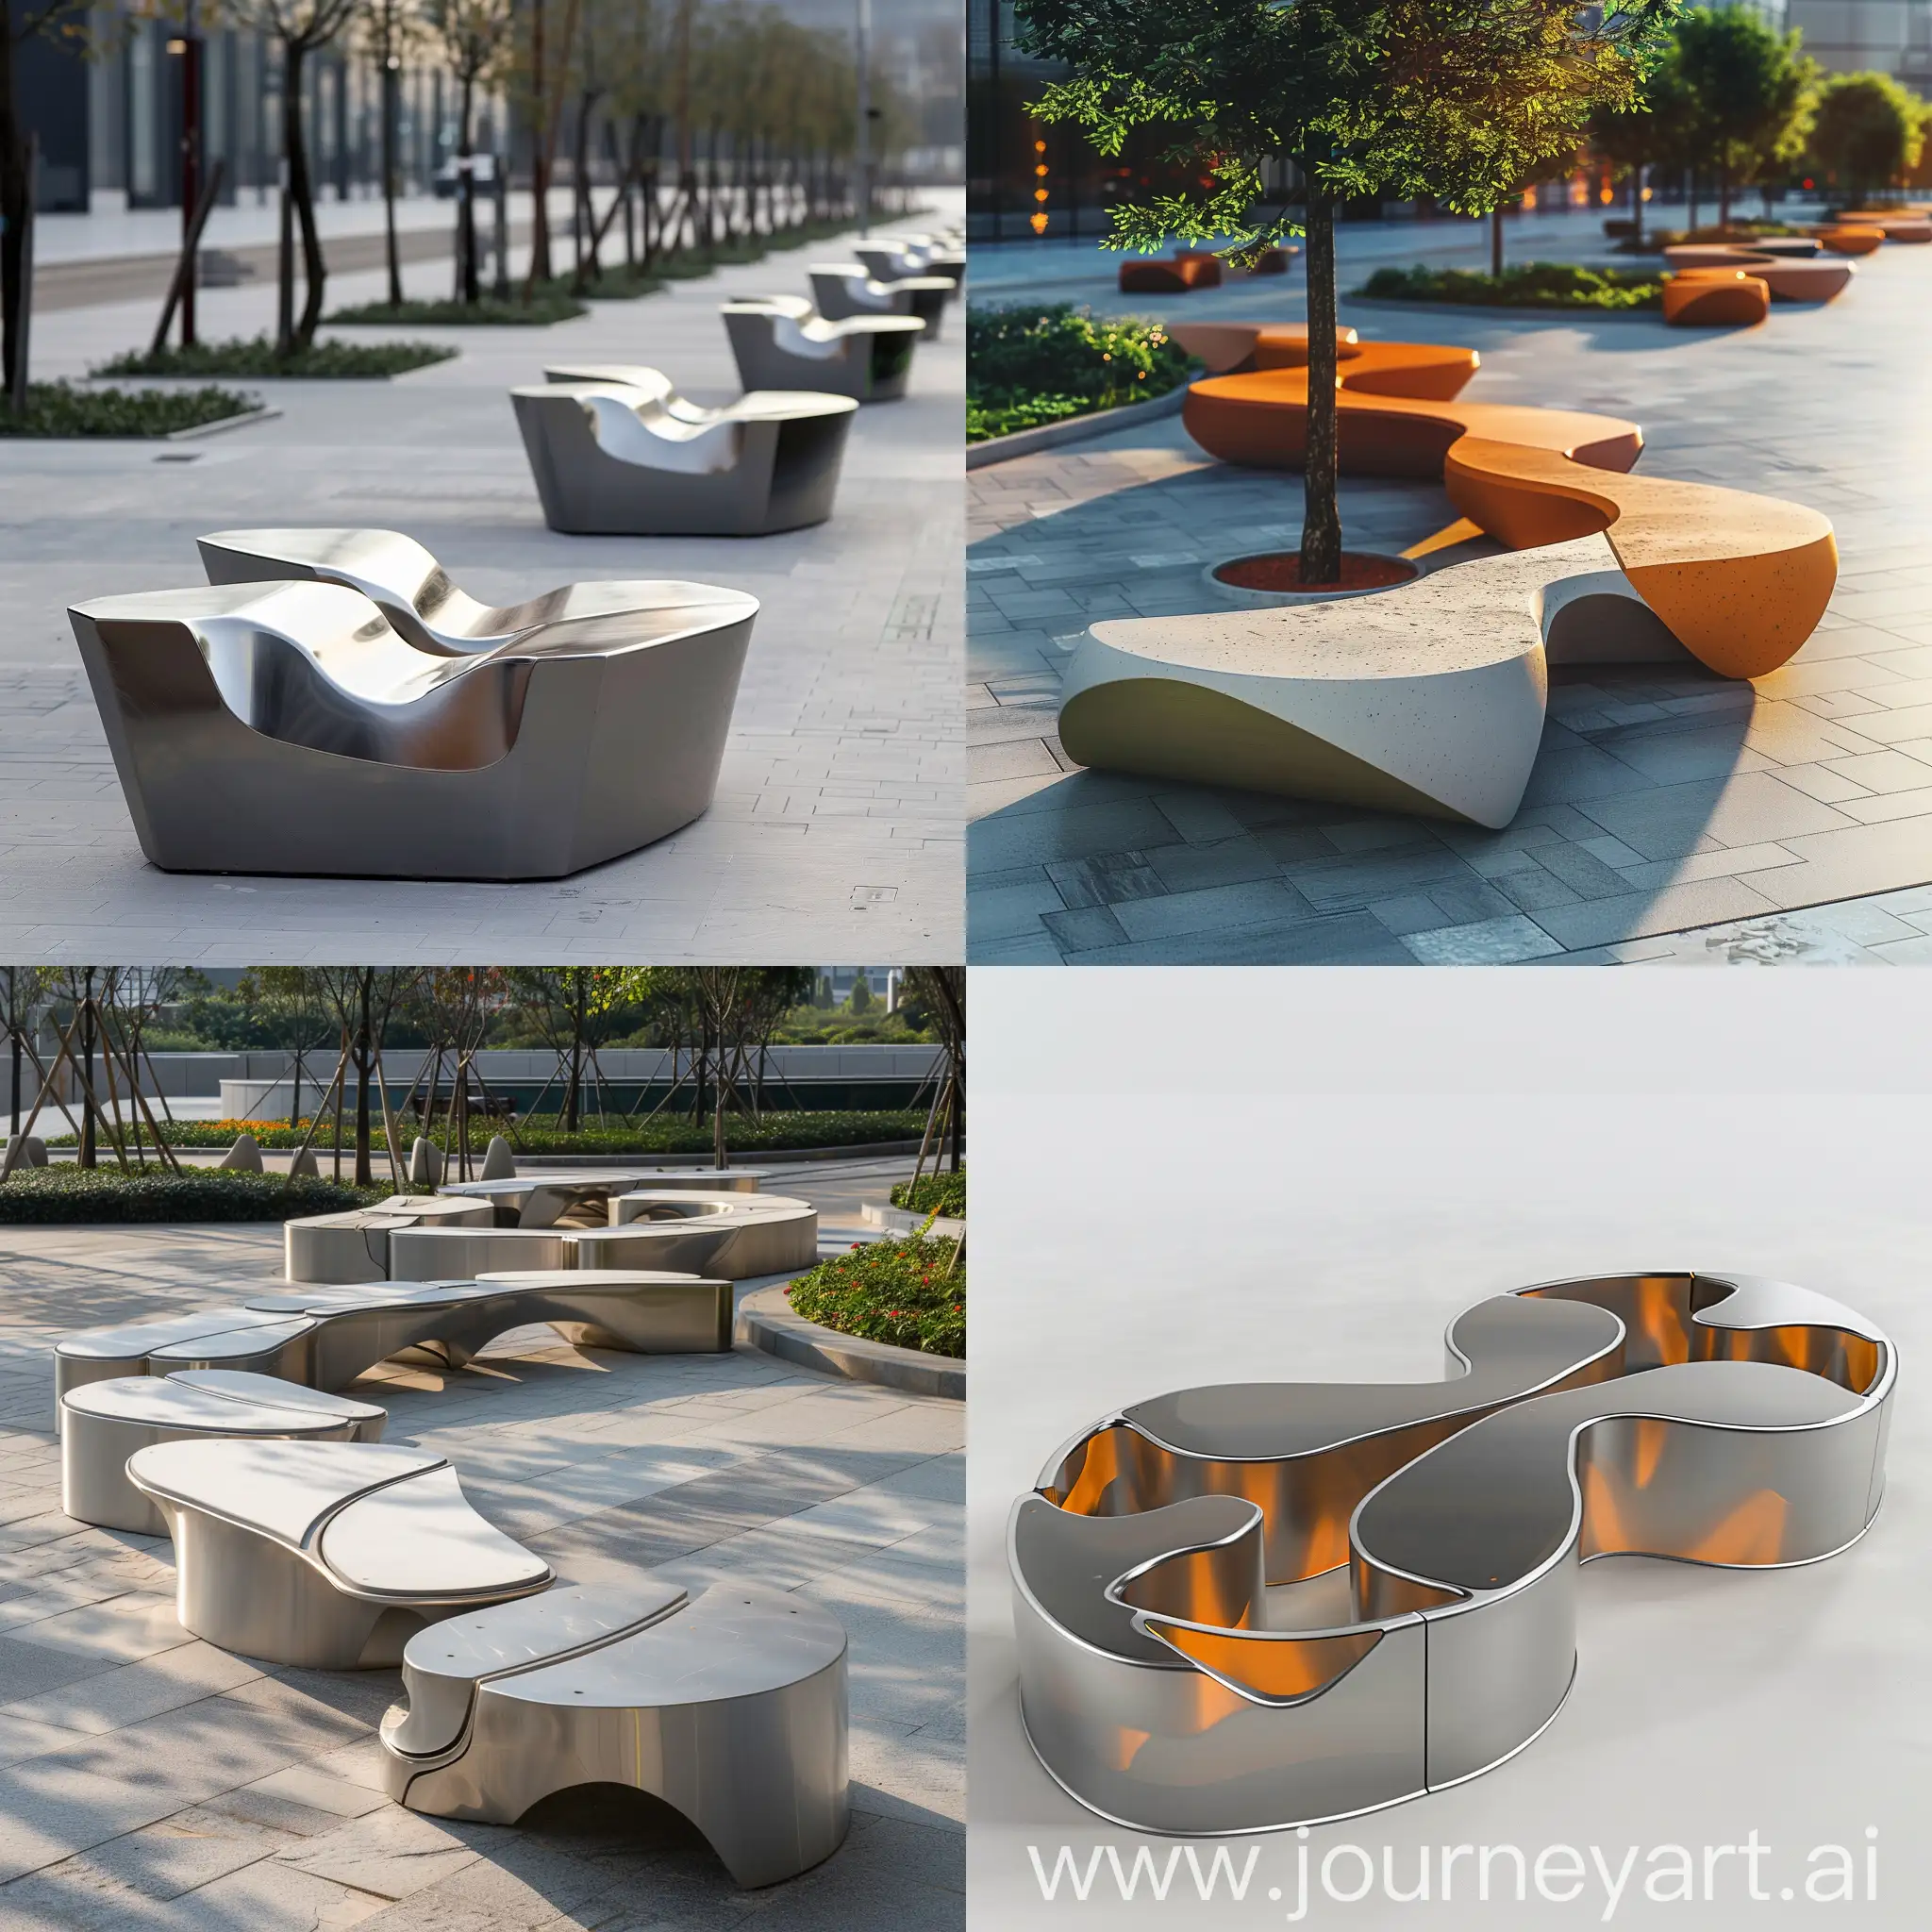 Design modular seating for urban parks and busy public spaces with a minimalist and Bauhaus-inspired style, incorporating symbolic elements of nature. The seating should feature geometric shapes with fluid curves, constructed from stainless steel or powder-coated aluminum. Modules should measure 1 meter x 1 meter and be customizable for different configurations. Use neutral tones with warm and cool color accents, and include interactive elements like movable backrests. The design should be durable, flexible, and visually engaging, suitable for global use. Form & Shape:Geometric shapes with fluid curves representing water.
Structural elements symbolizing earth for stability.
Structure:Made from metal rods and sheets.
Modular components that fit together seamlessly.
Dimensions:Standard module size: 1 meter x 1 meter, customizable for various configurations.
Materials:Stainless steel or powder-coated aluminum.
Color:Neutral tones with accents representing fire (warm colors) and air (cool colors).
Features:Modular Flexibility: Can be reconfigured easily.
Interactive Elements: Movable backrests or seats.
Location:Urban parks, plazas, busy public spaces.